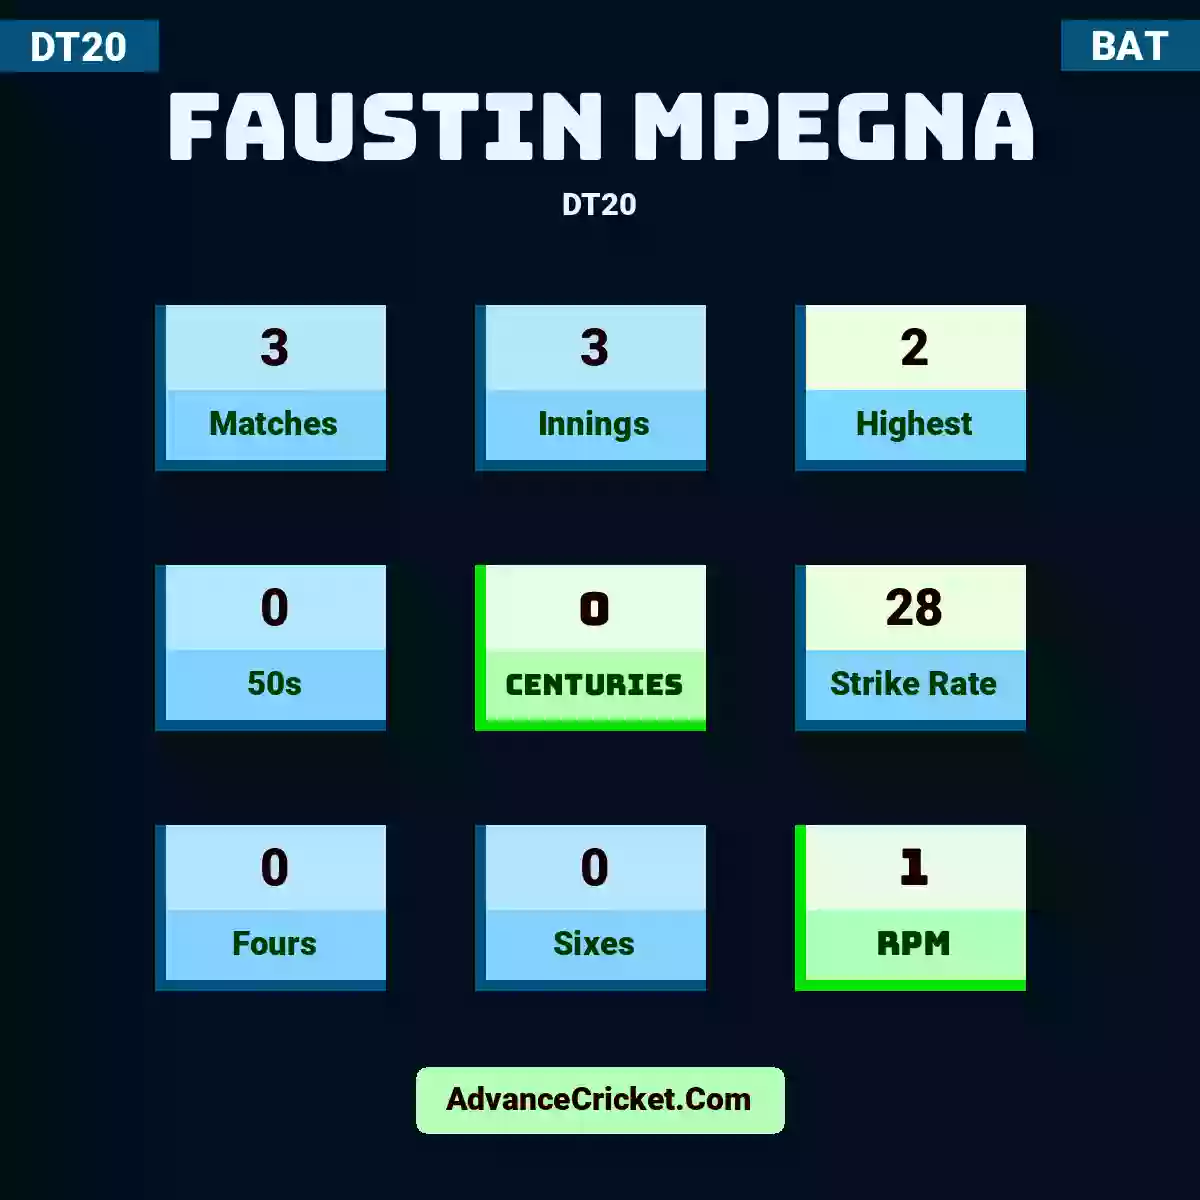 Faustin Mpegna DT20 , Faustin Mpegna played 3 matches, scored 2 runs as highest, 0 half-centuries, and 0 centuries, with a strike rate of 28. F.Mpegna hit 0 fours and 0 sixes, with an RPM of 1.